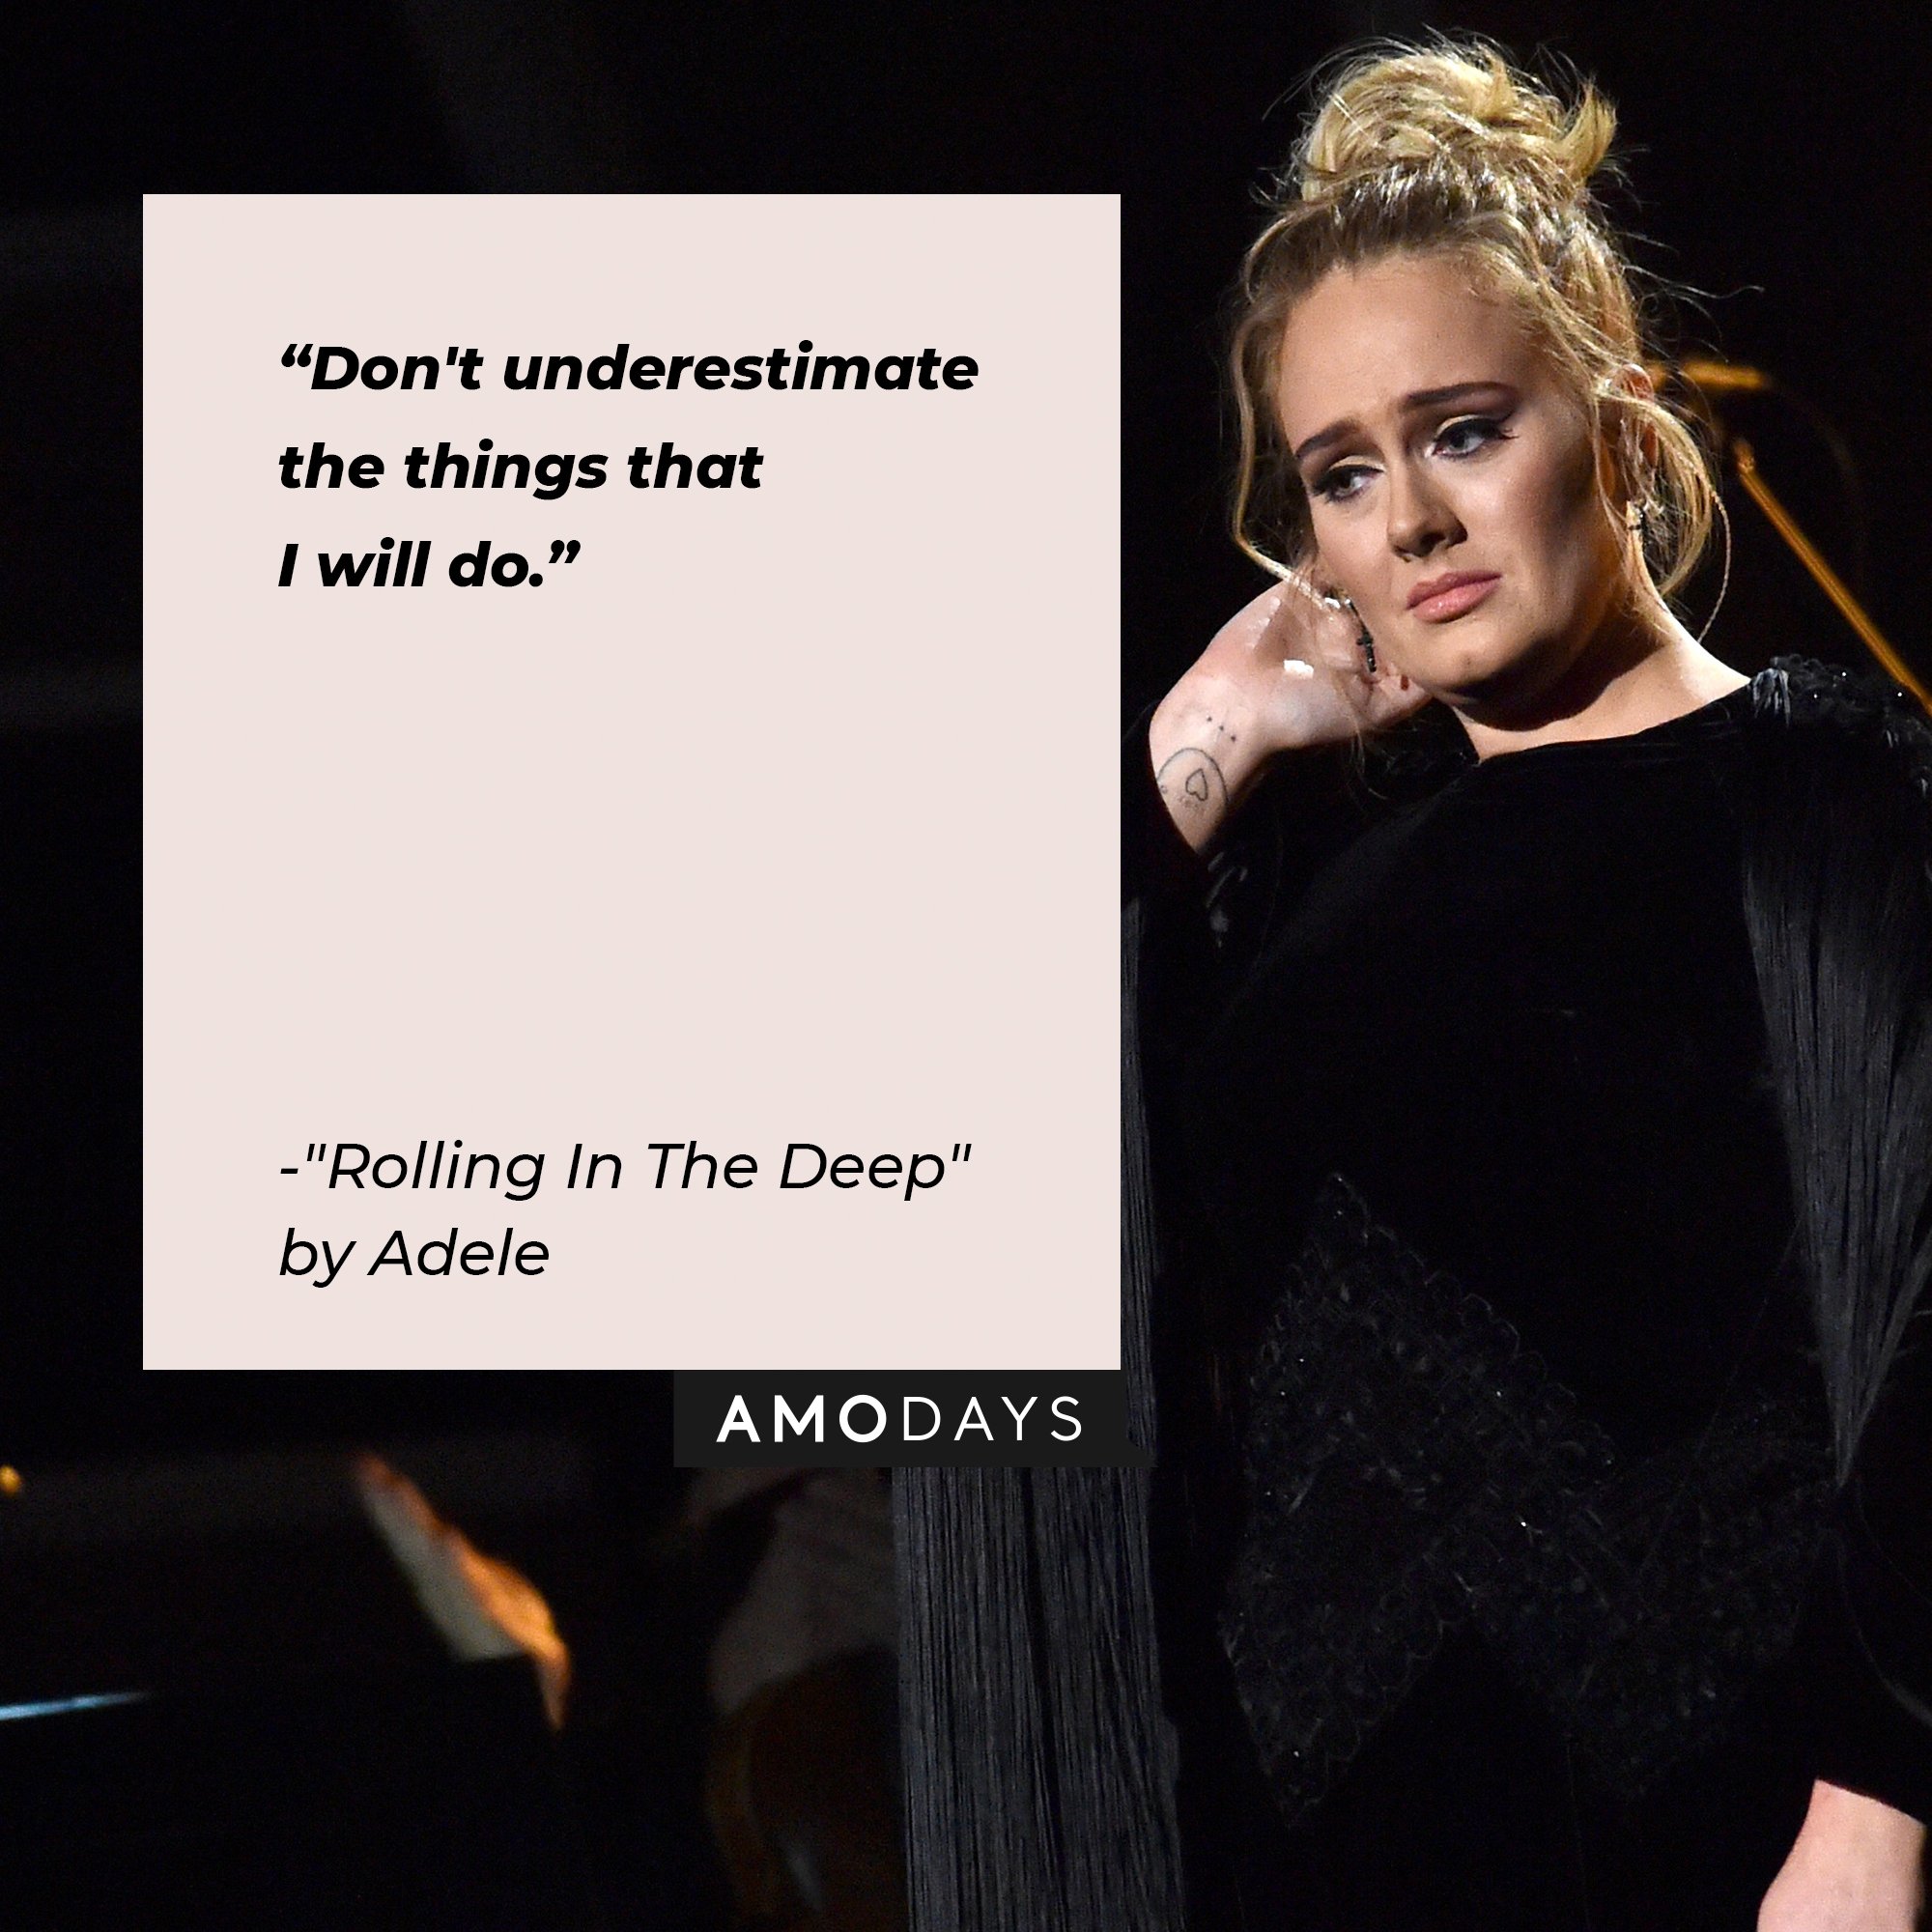 Adele’s quote from “Rolling In The Deep” "Don't underestimate the things that I will do." | Image: AmoDays